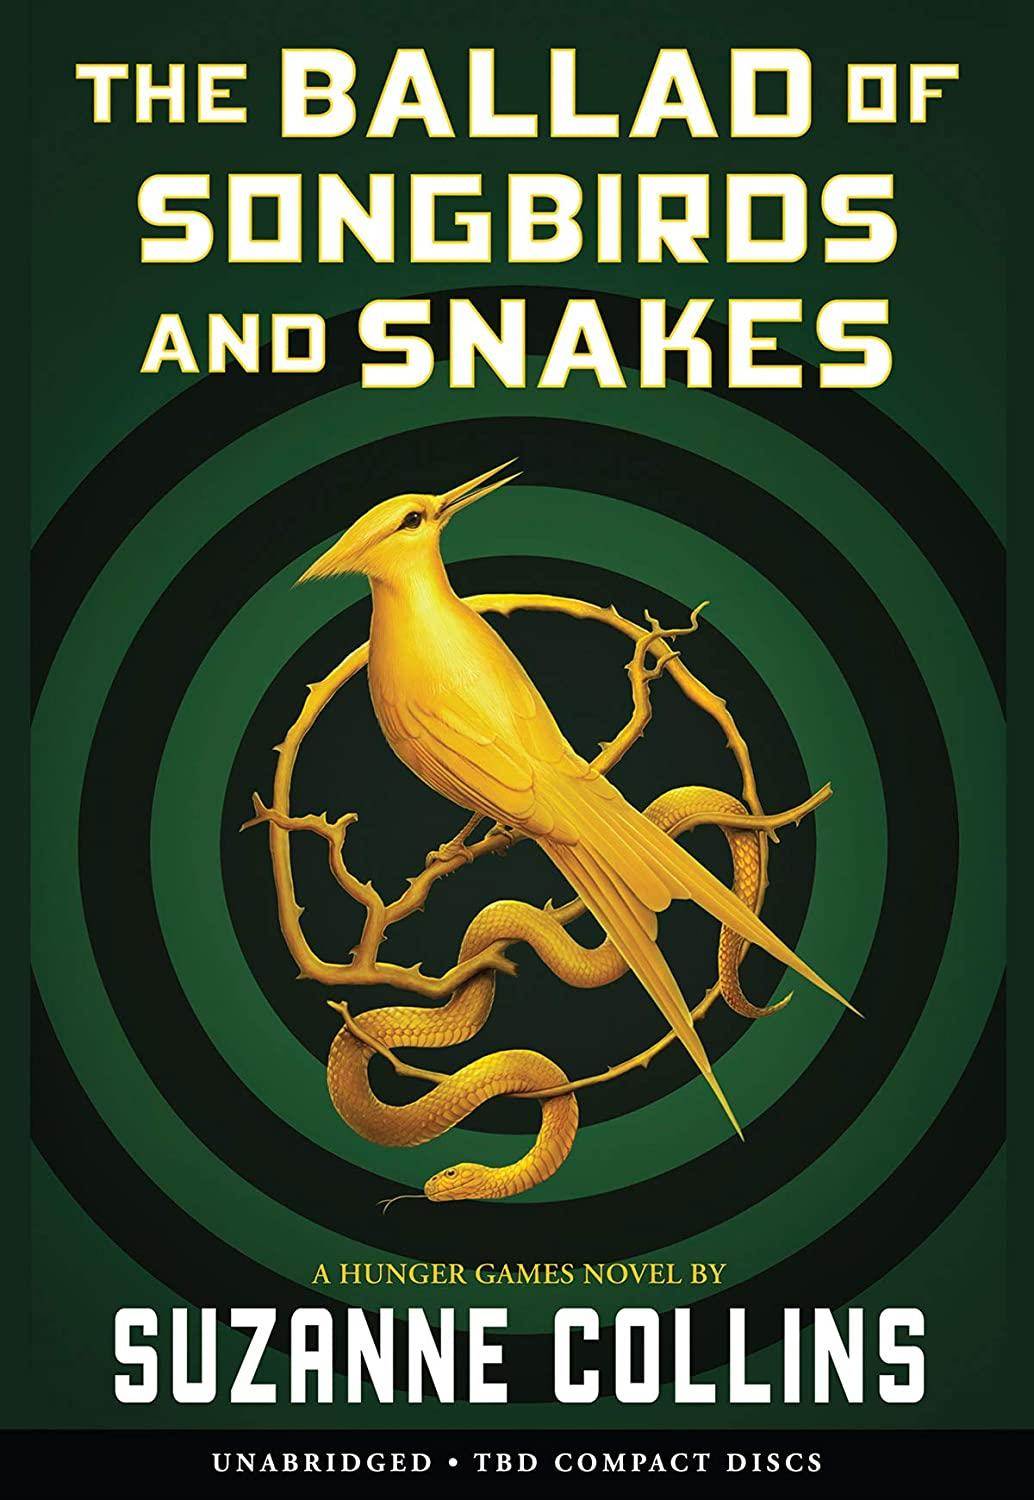 The Ballad of Songbirds and Snakes (A Hunger Games Novel) (Unabridged edition)